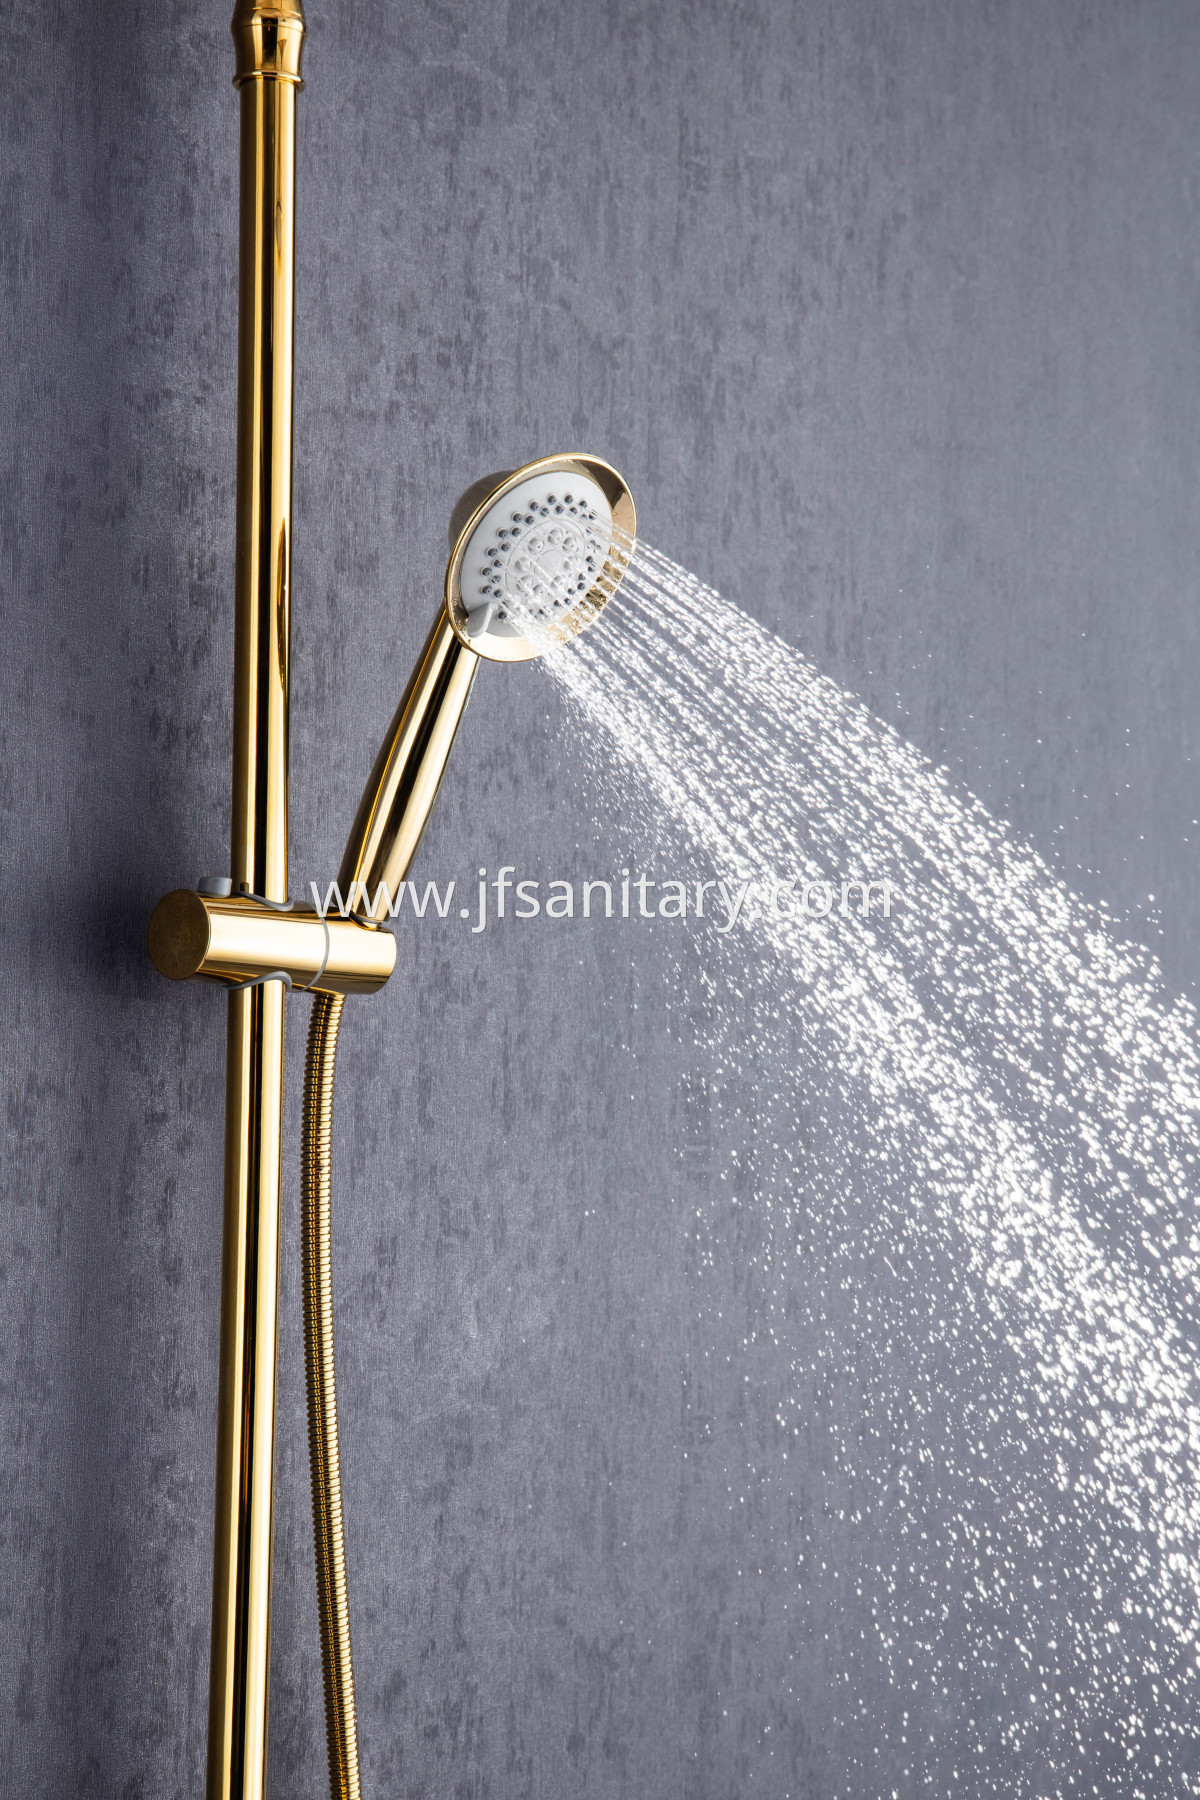 bathtub faucet with handheld shower head